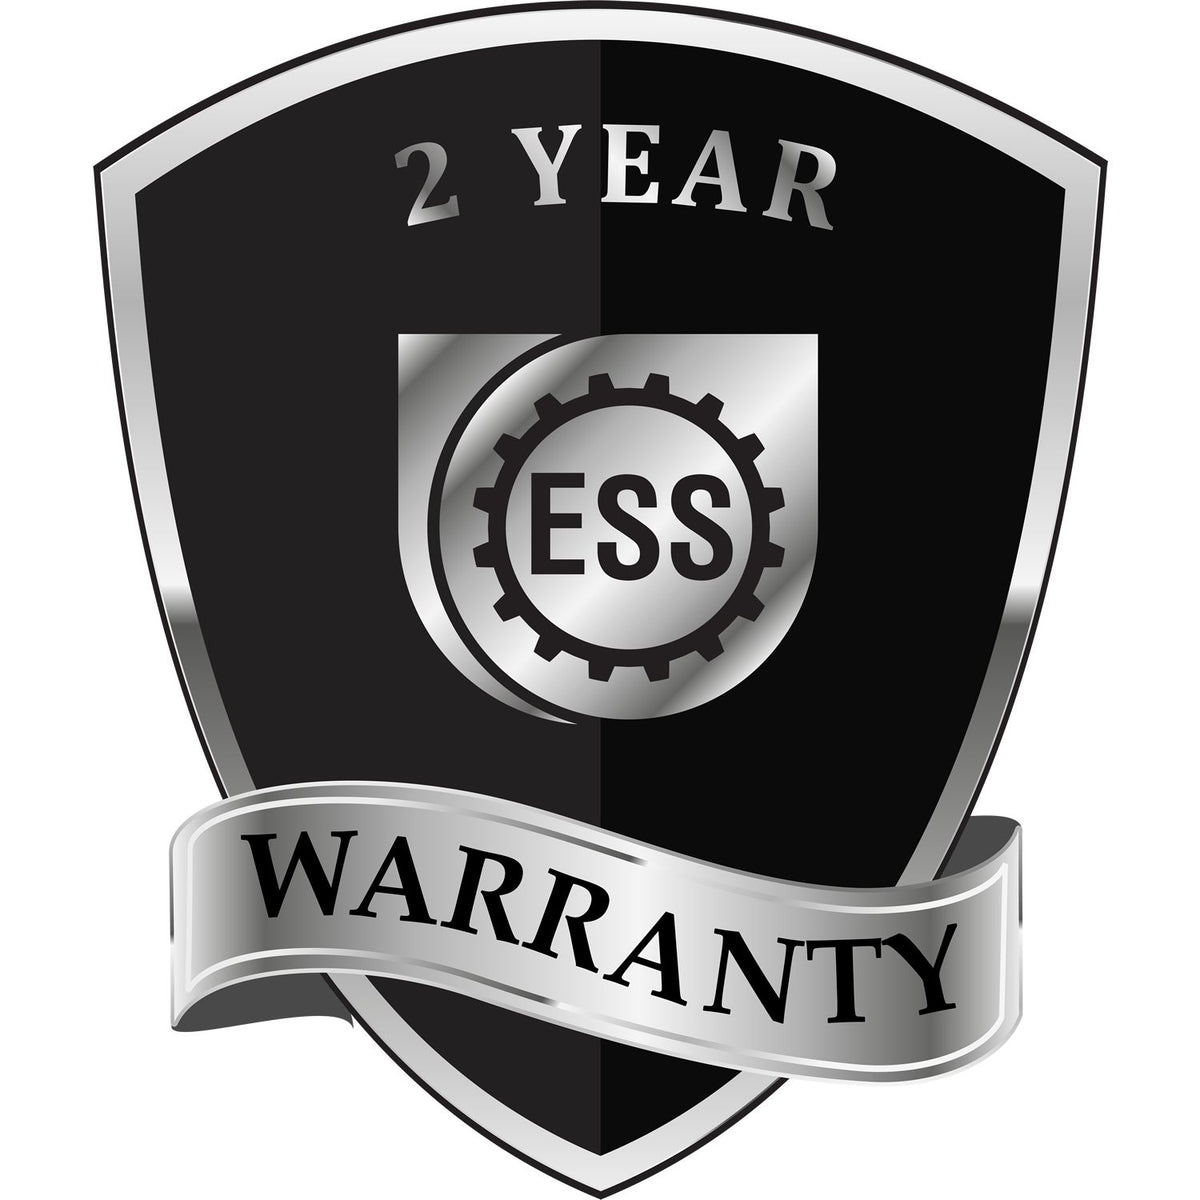 A black and silver badge or emblem showing warranty information for the West Virginia Geologist Desk Seal